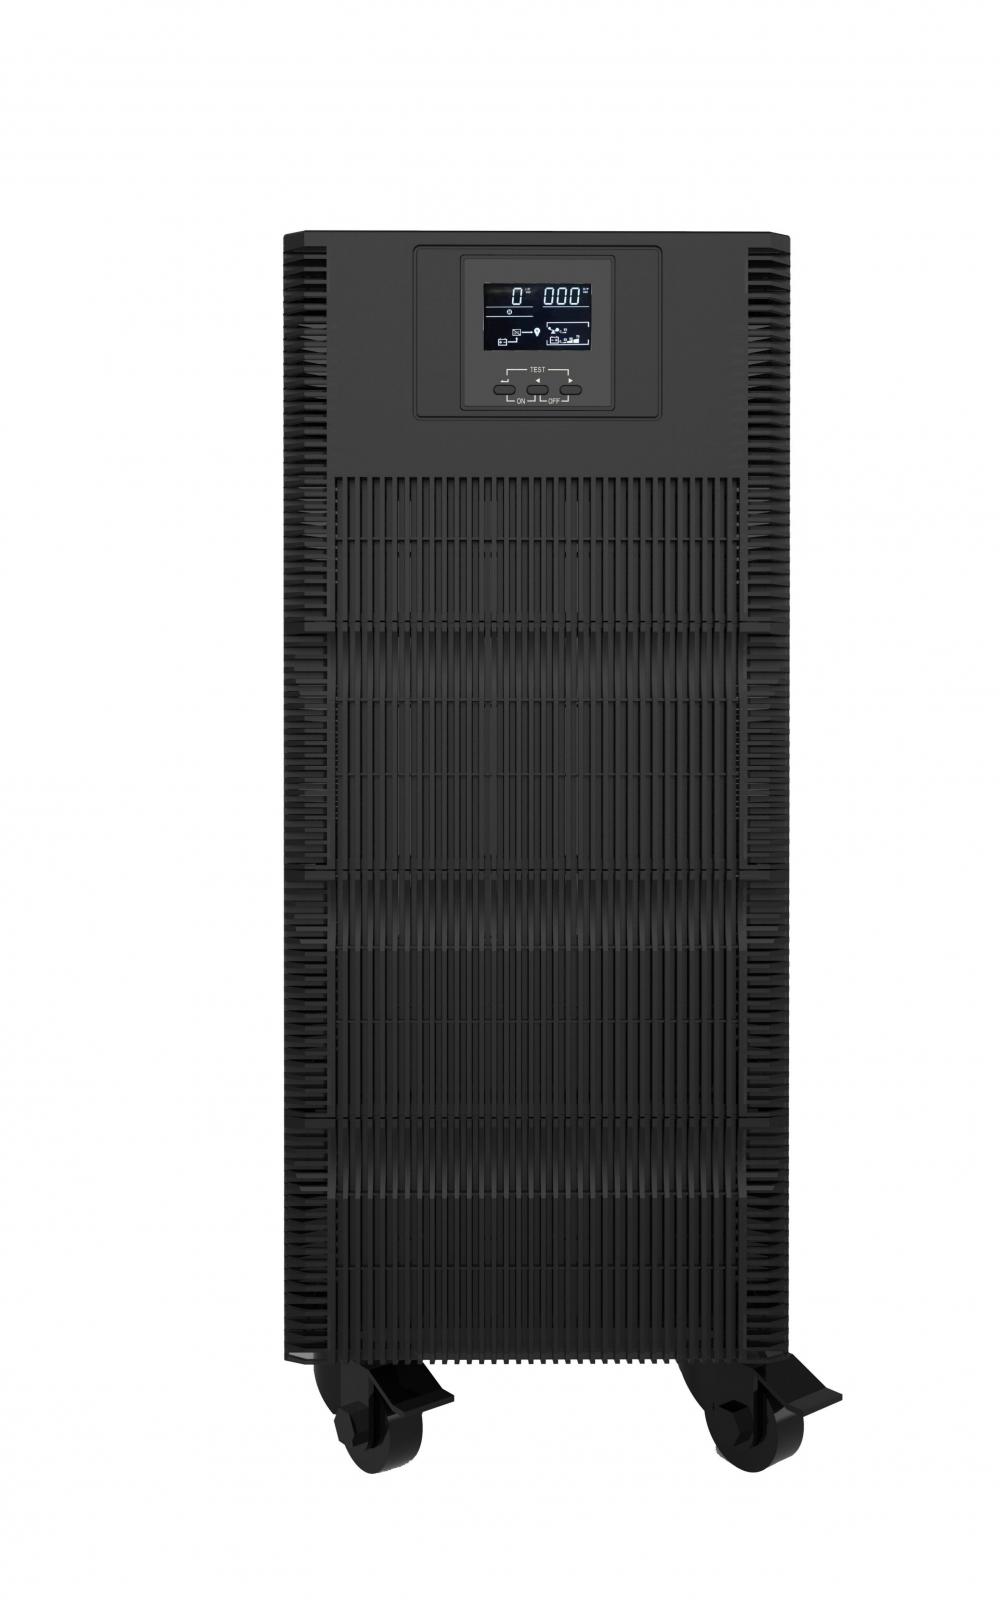 Single Phase High Frequency Online UPS 110VAC 15-20KVA